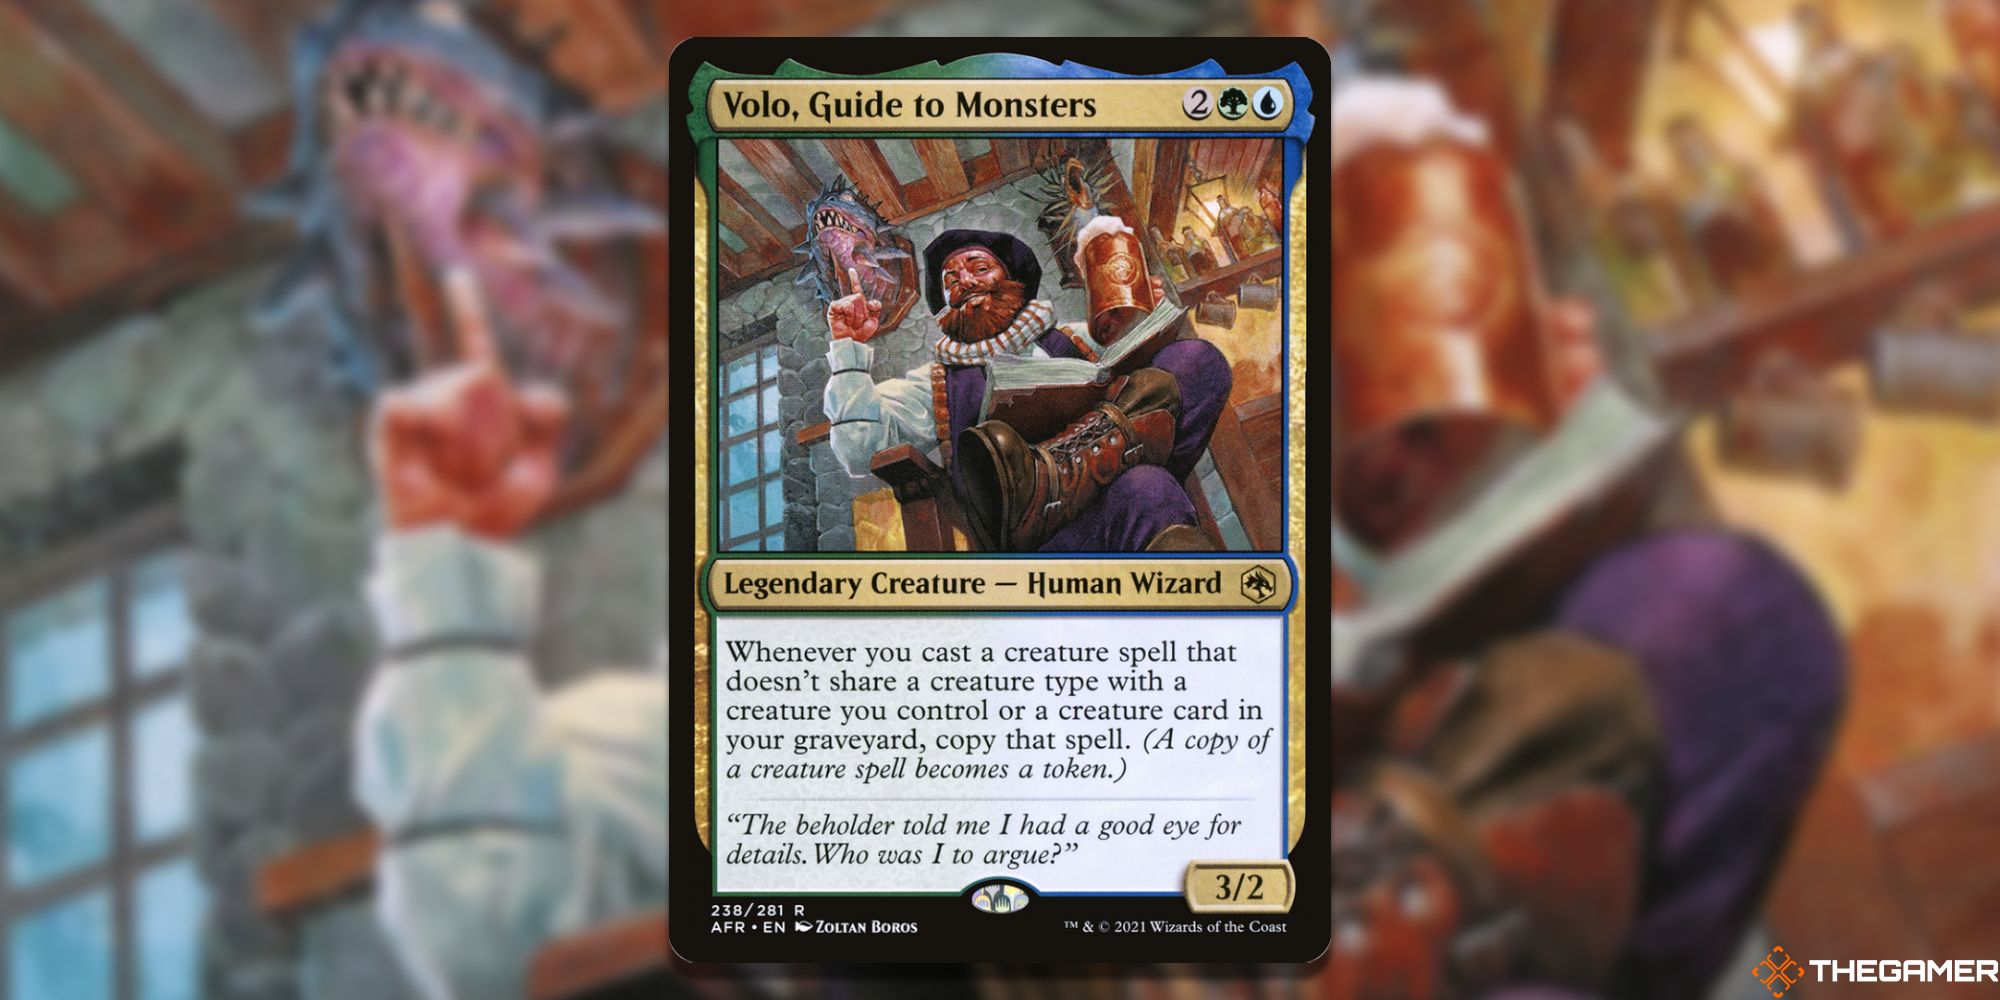 Image of the Volo, Guide to Monsters card in Magic: The Gathering, with art by Zoltan Boros